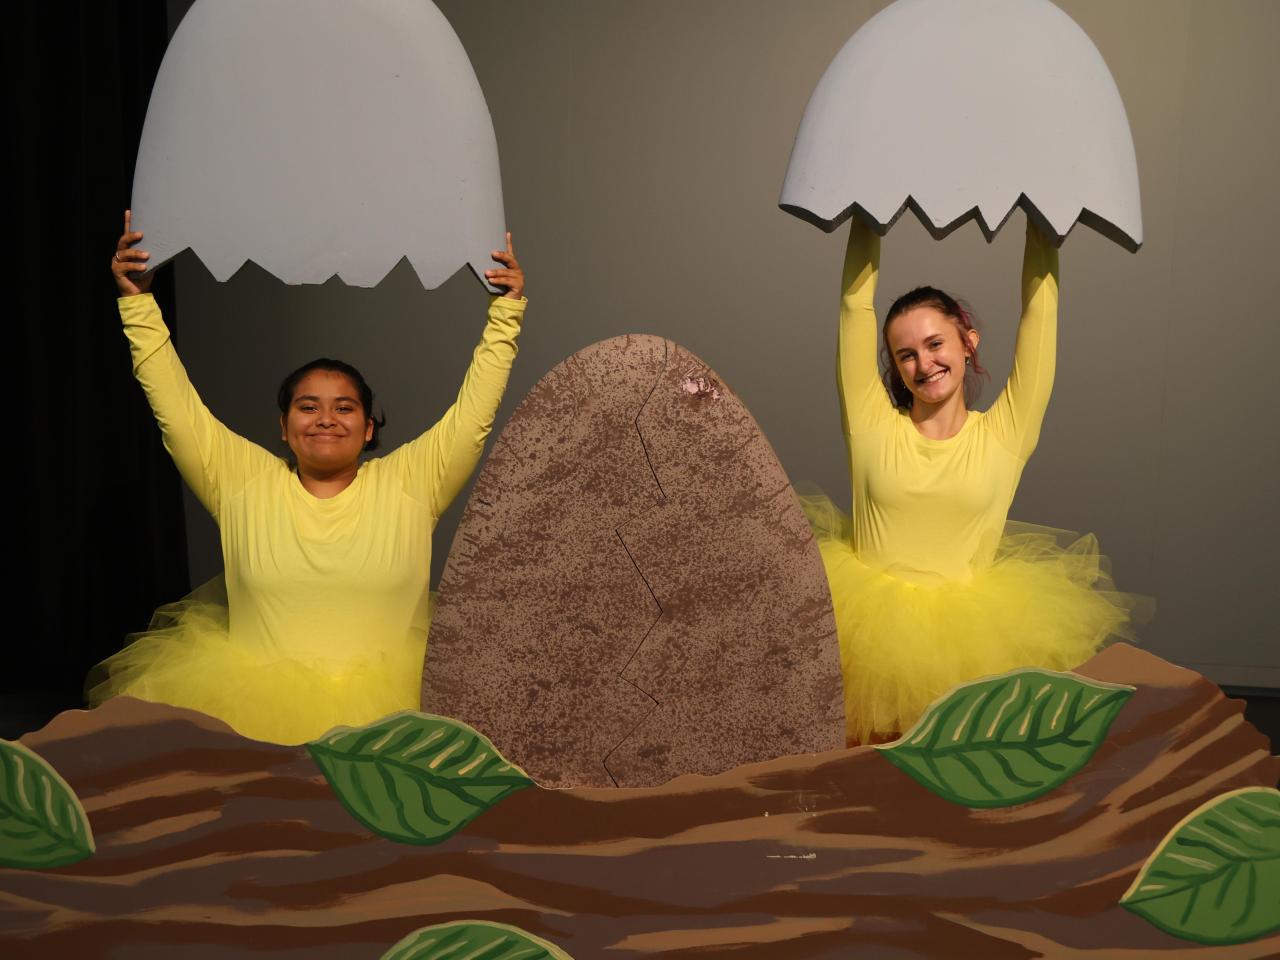 Two ducklings emerge from their eggs on stage